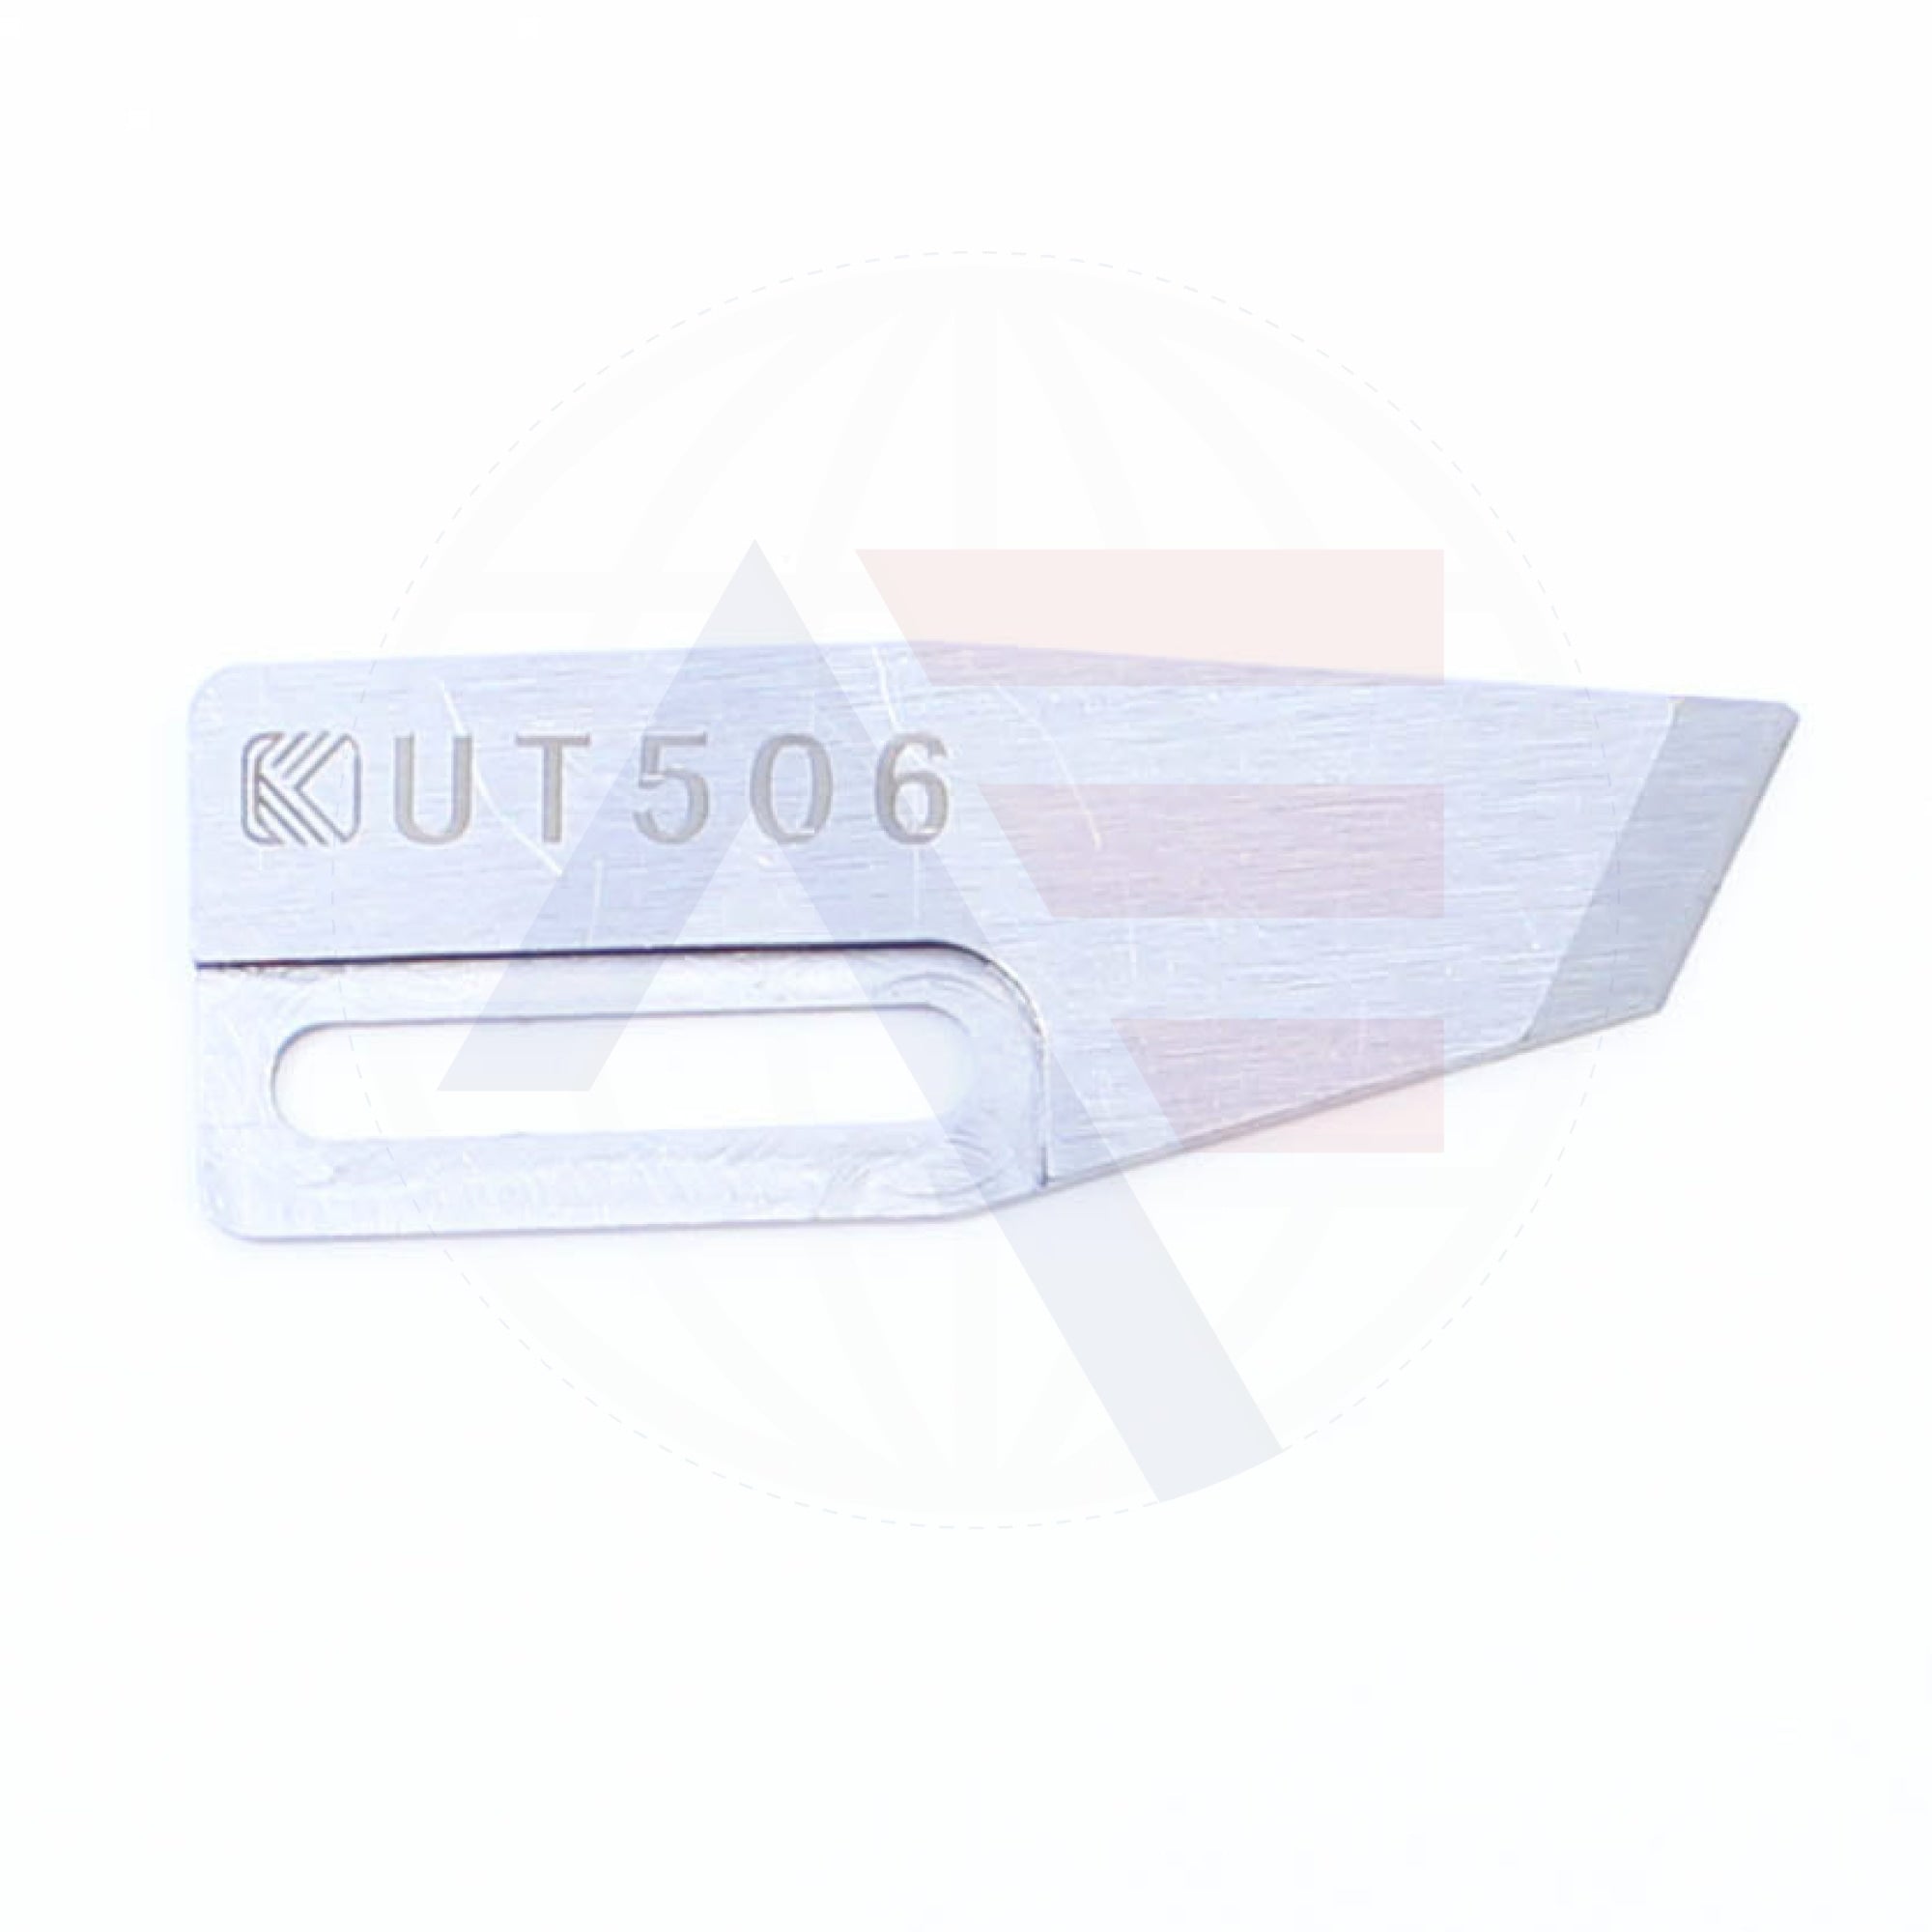 Ut506K Stationary Knife Sewing Machine Spare Parts